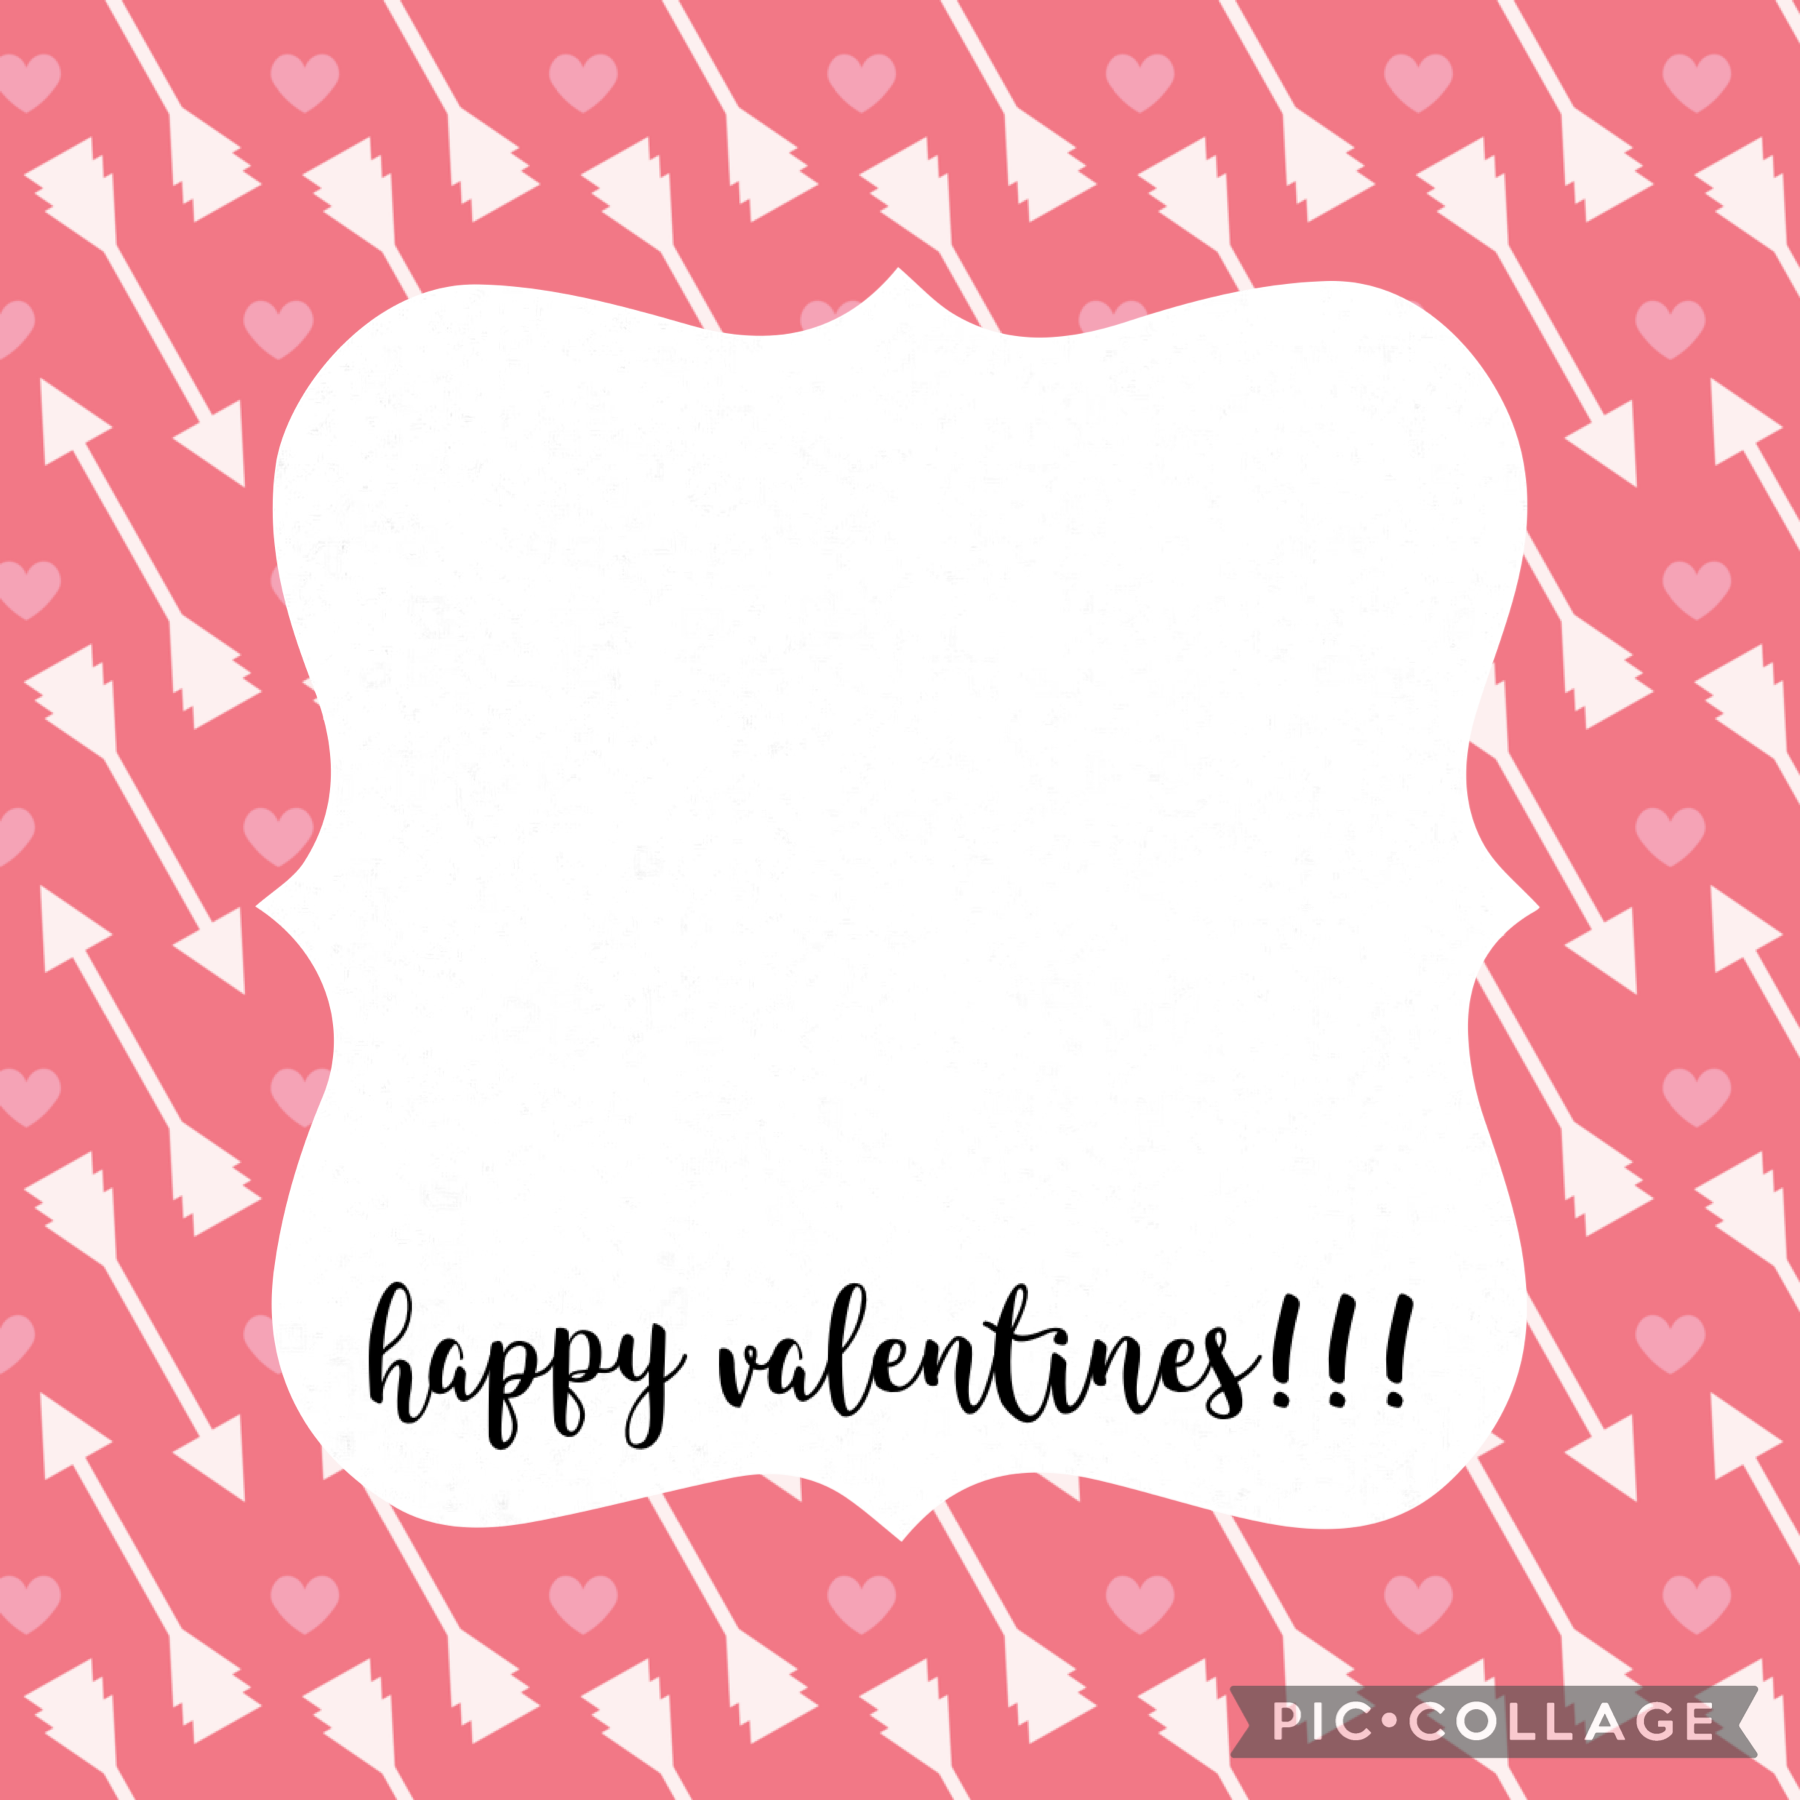 use this template for a cute insta photo with your valentine! xoxo ❤︎